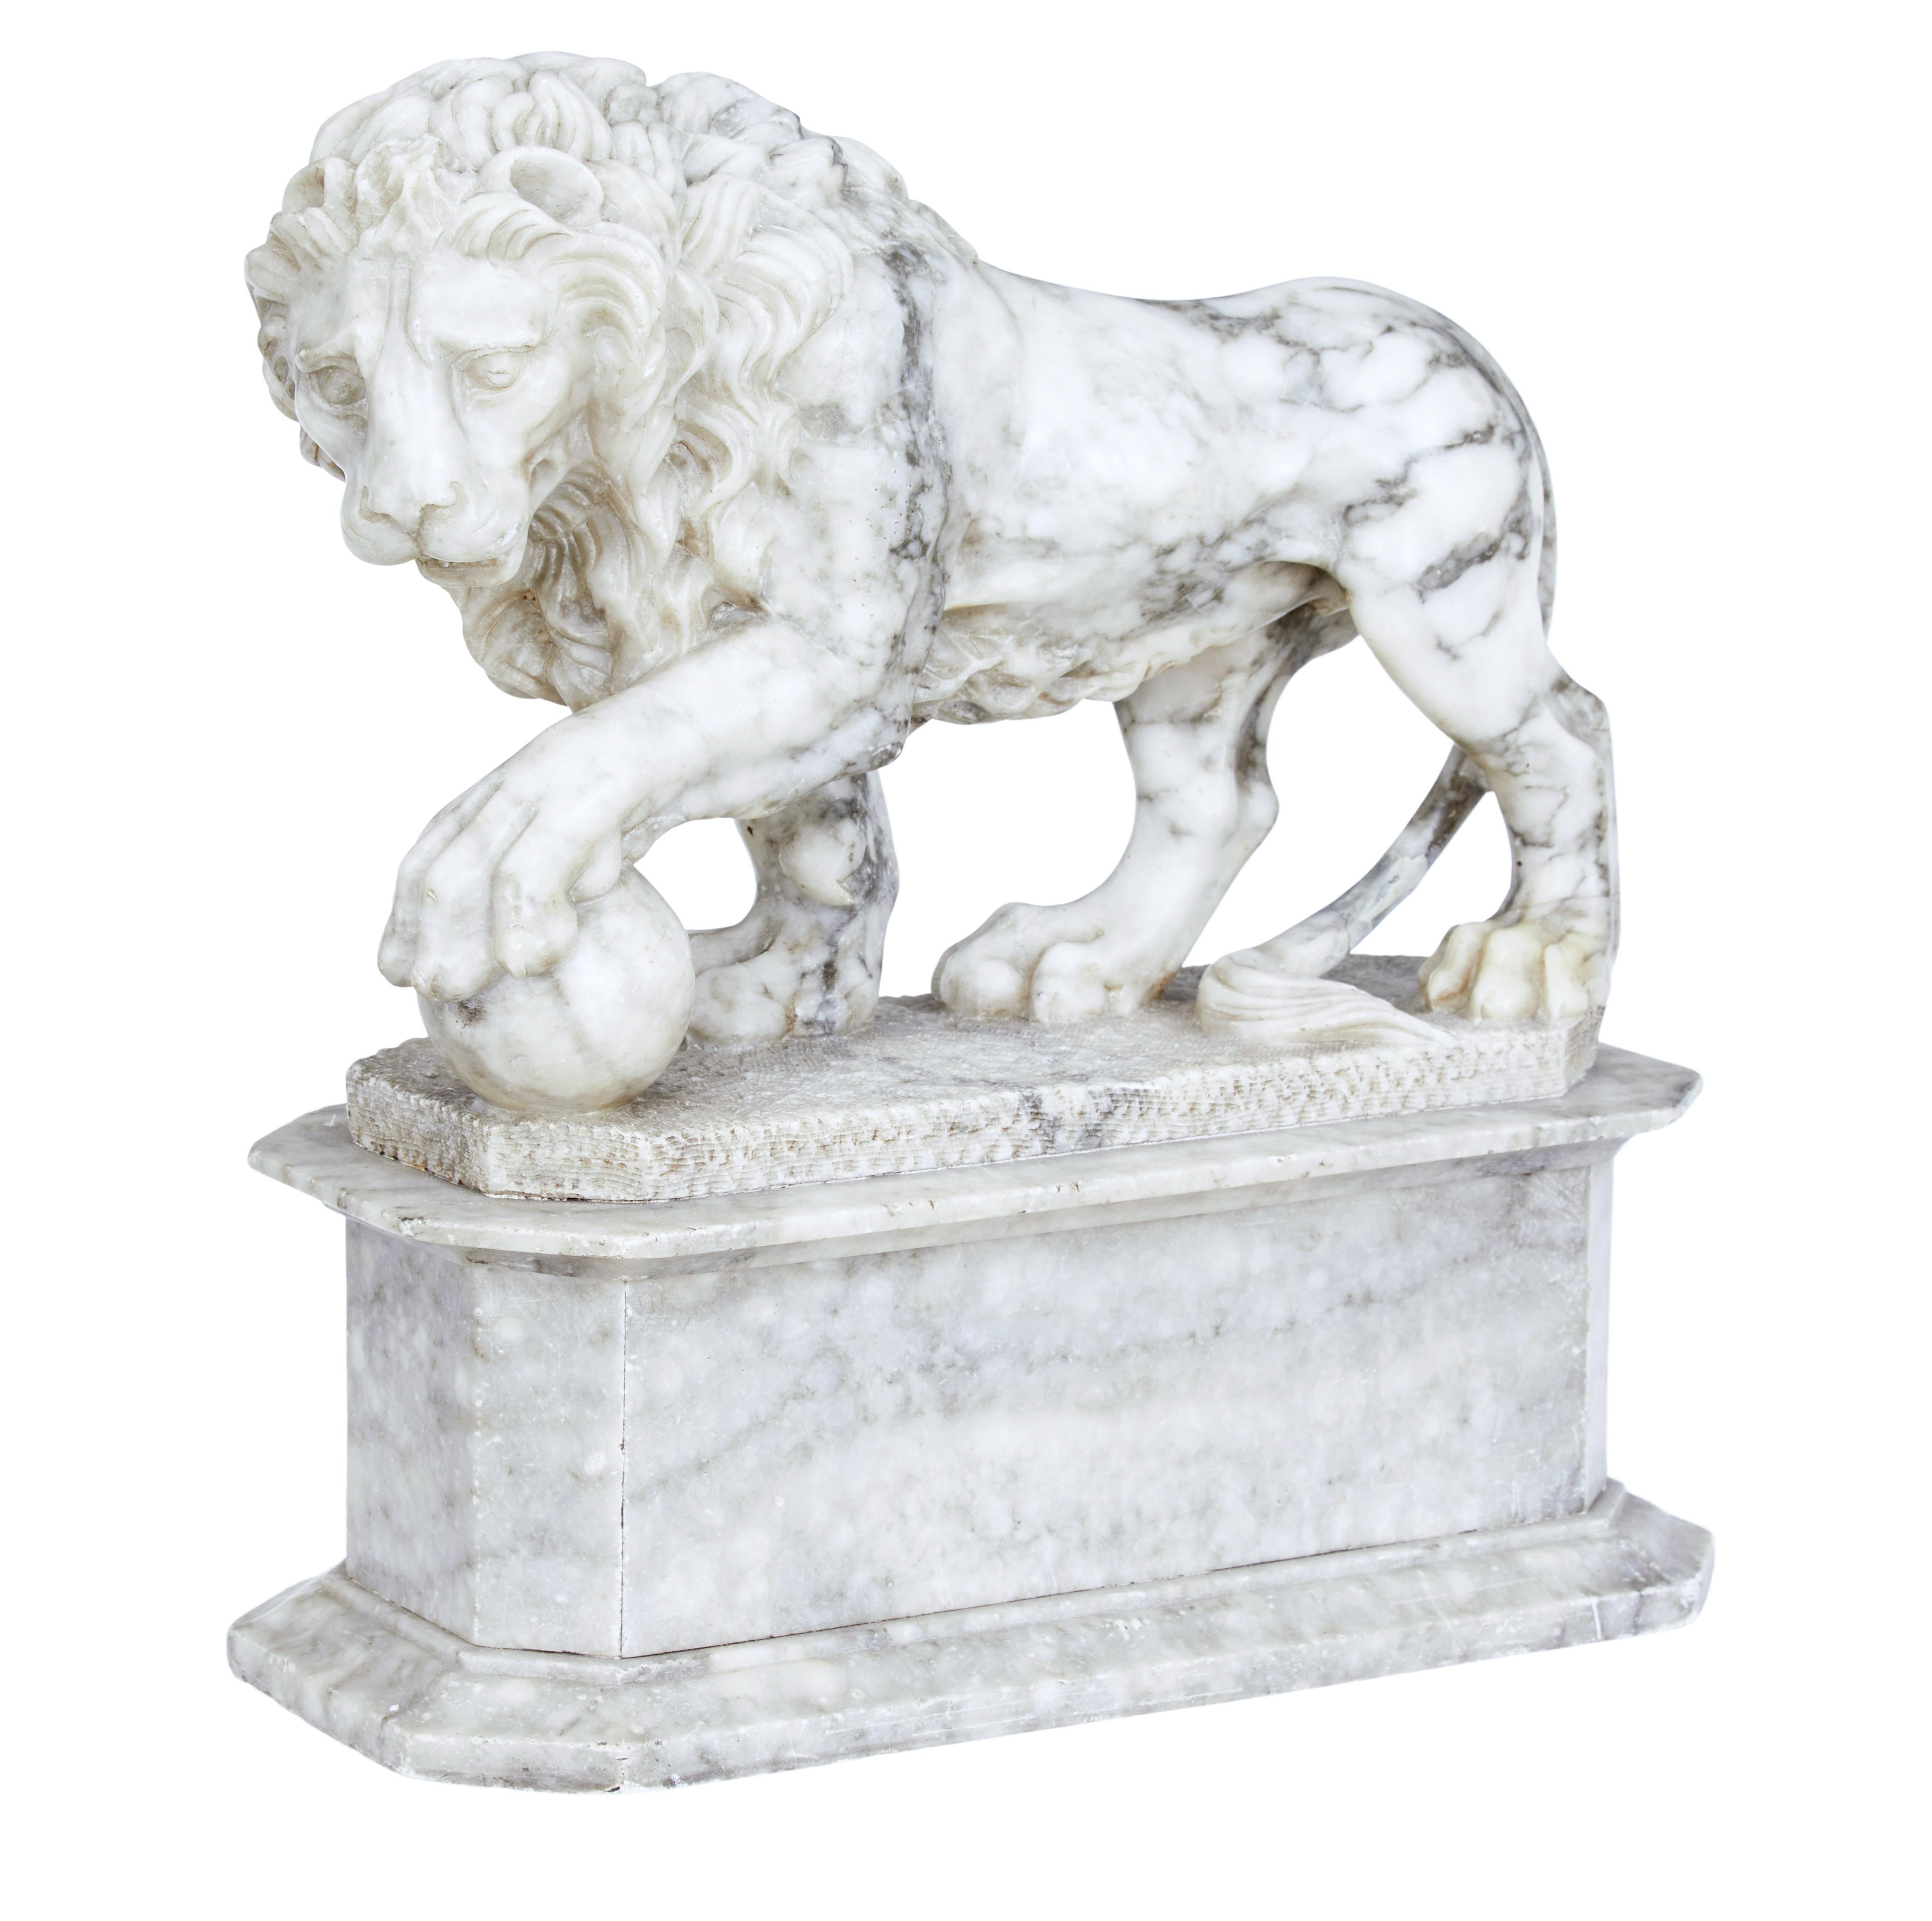 Mid 19th century Italian grand tour marble statue, circa 1860.

Fine quality white marble with grey veining carved lion with 1 foot on a ball. The lion is in a standing position with the ball re-presenting the world.

Standing on an